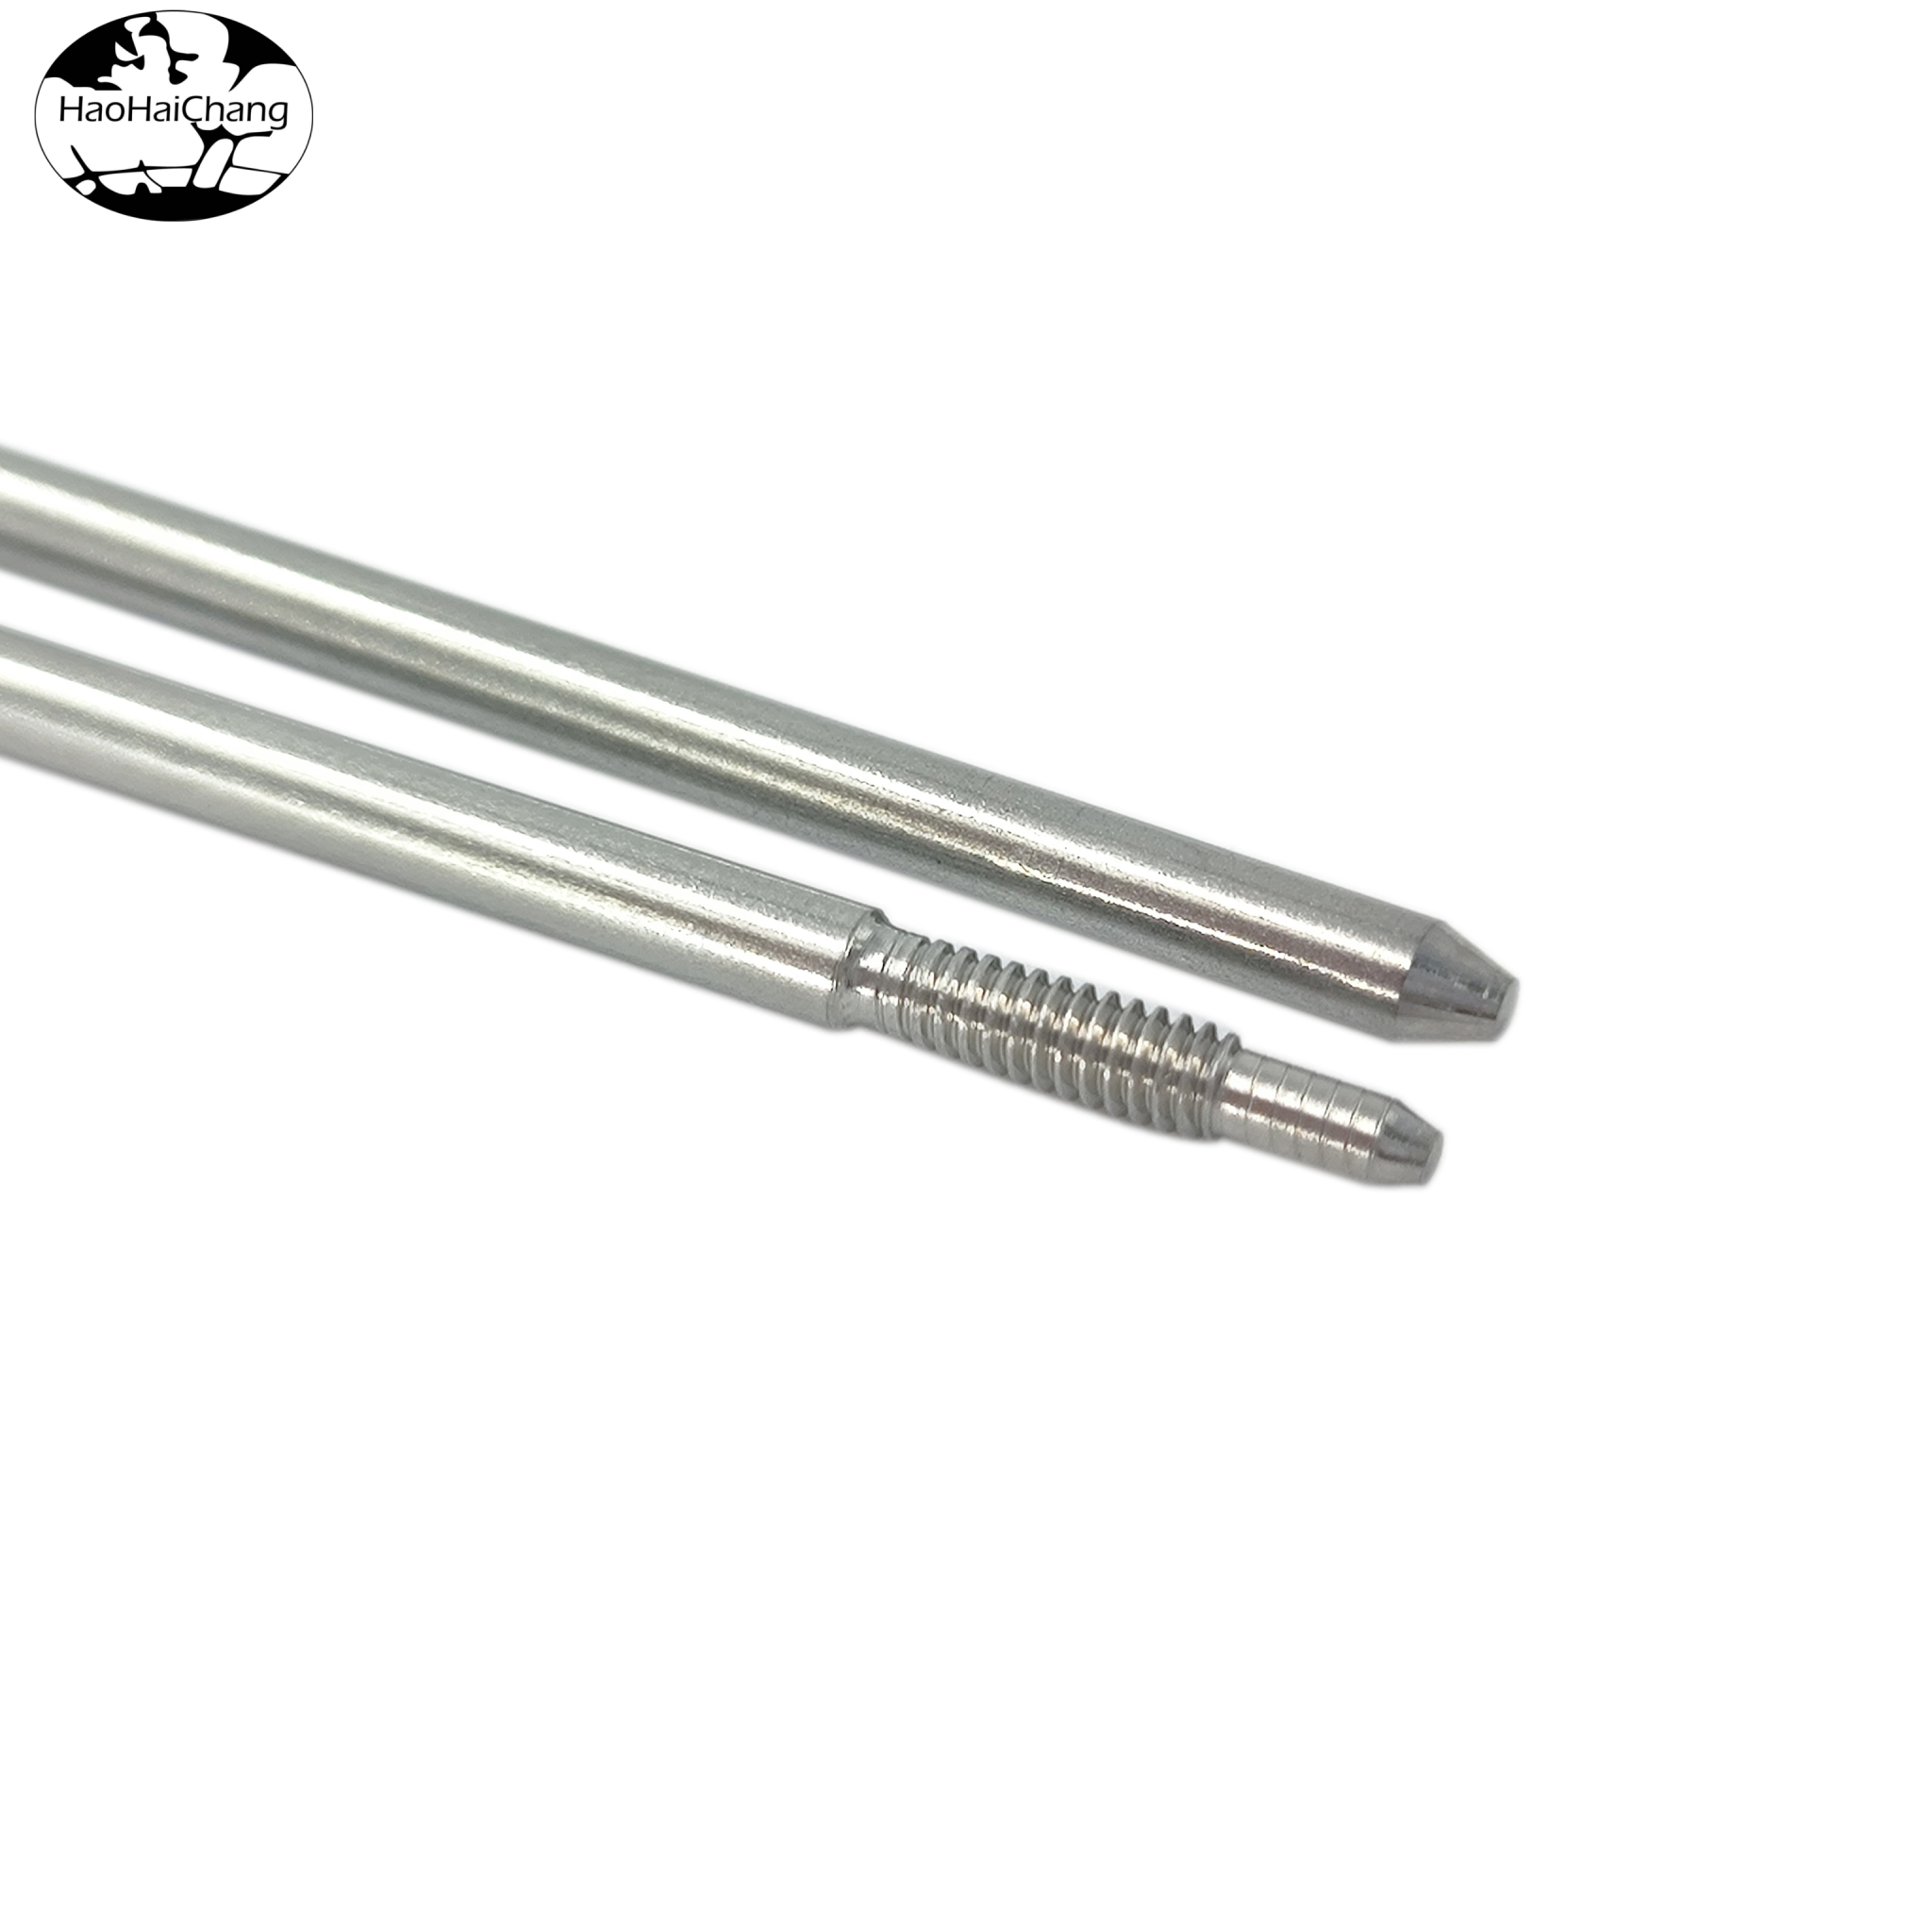 HHC-505 Terminal Pin Electric Heating Pipe Stainless Steel Threaded Lower Lead Rod